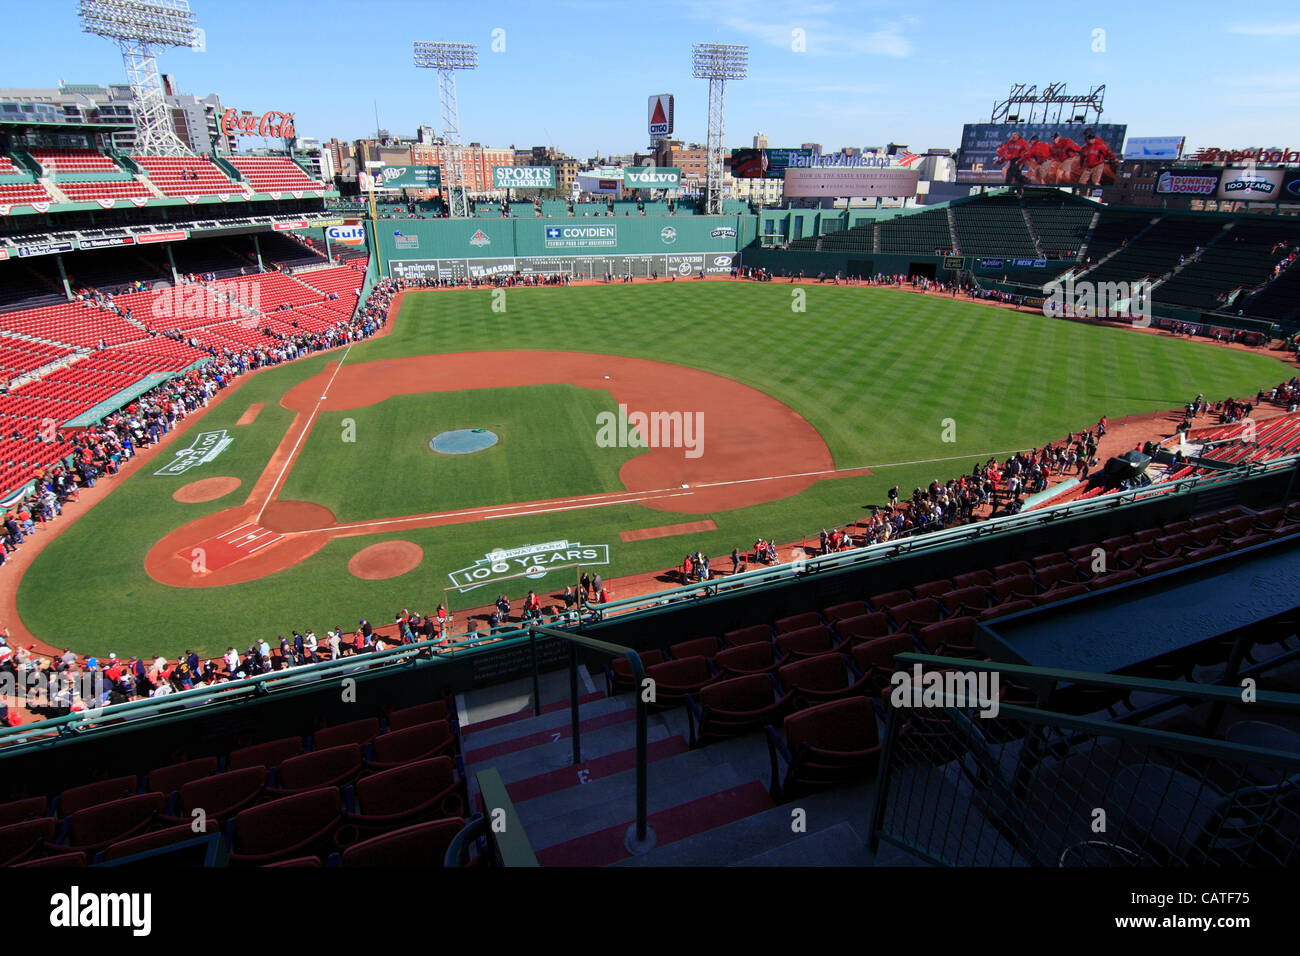 Boston, Massachusetts, USA. April 19, 2012. One Hour after Fenway Park opened to the public for an open house on its 100th Anniversary. Red Sox fans lined up along the edge of the stadium in order to catch a glimpse of the dugouts, Green Monster and bullpens. Stock Photo